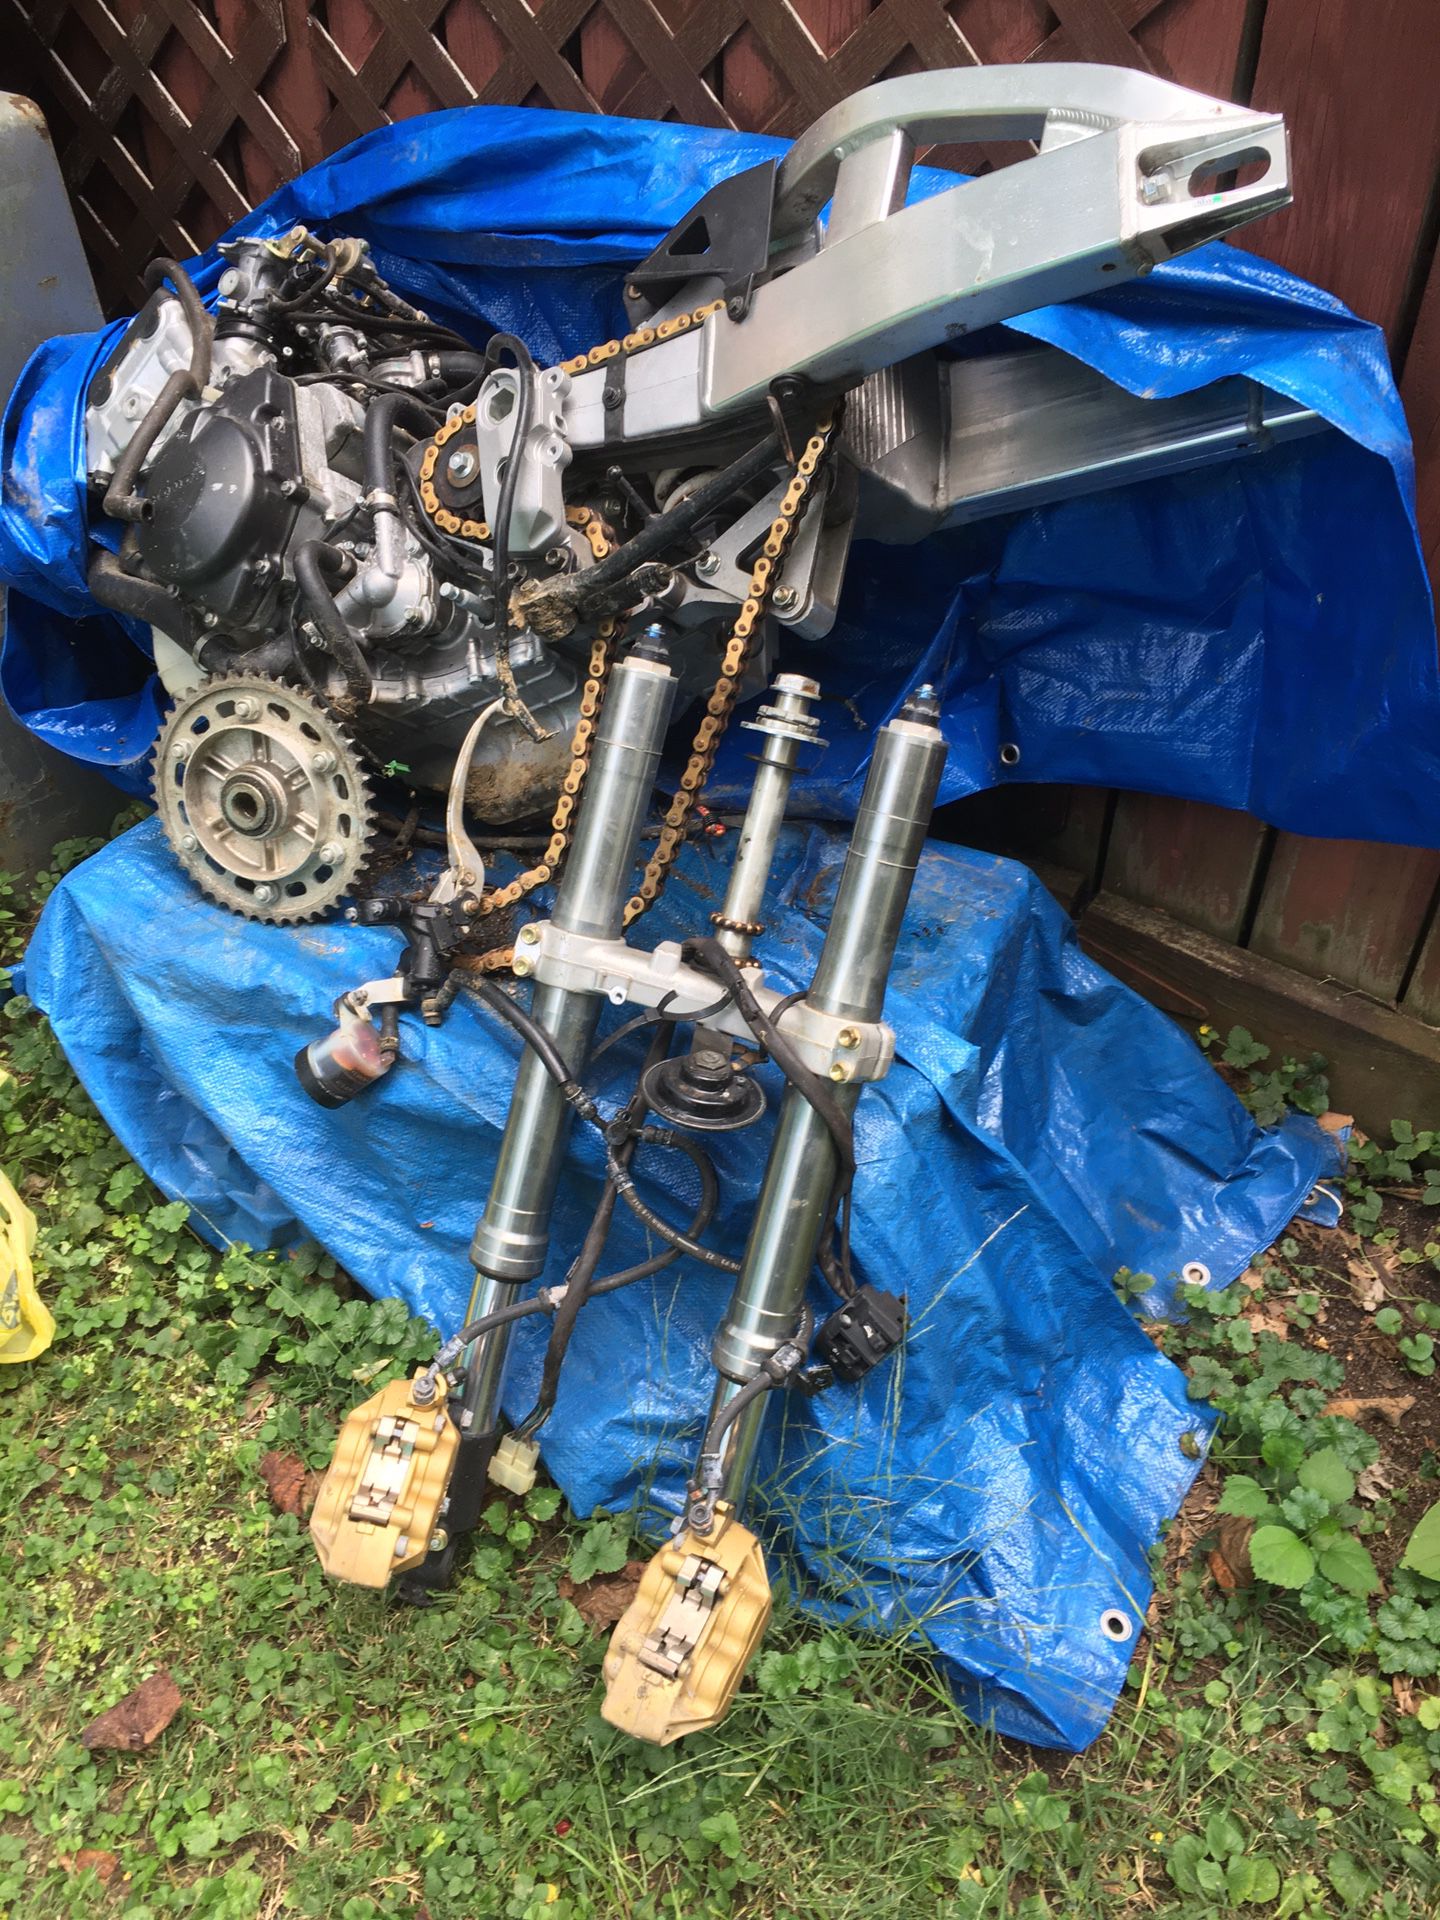 Motorcycle Engine  will take a reasonable offers,  We Will Be Moving Later This Year , So Need To Sale 